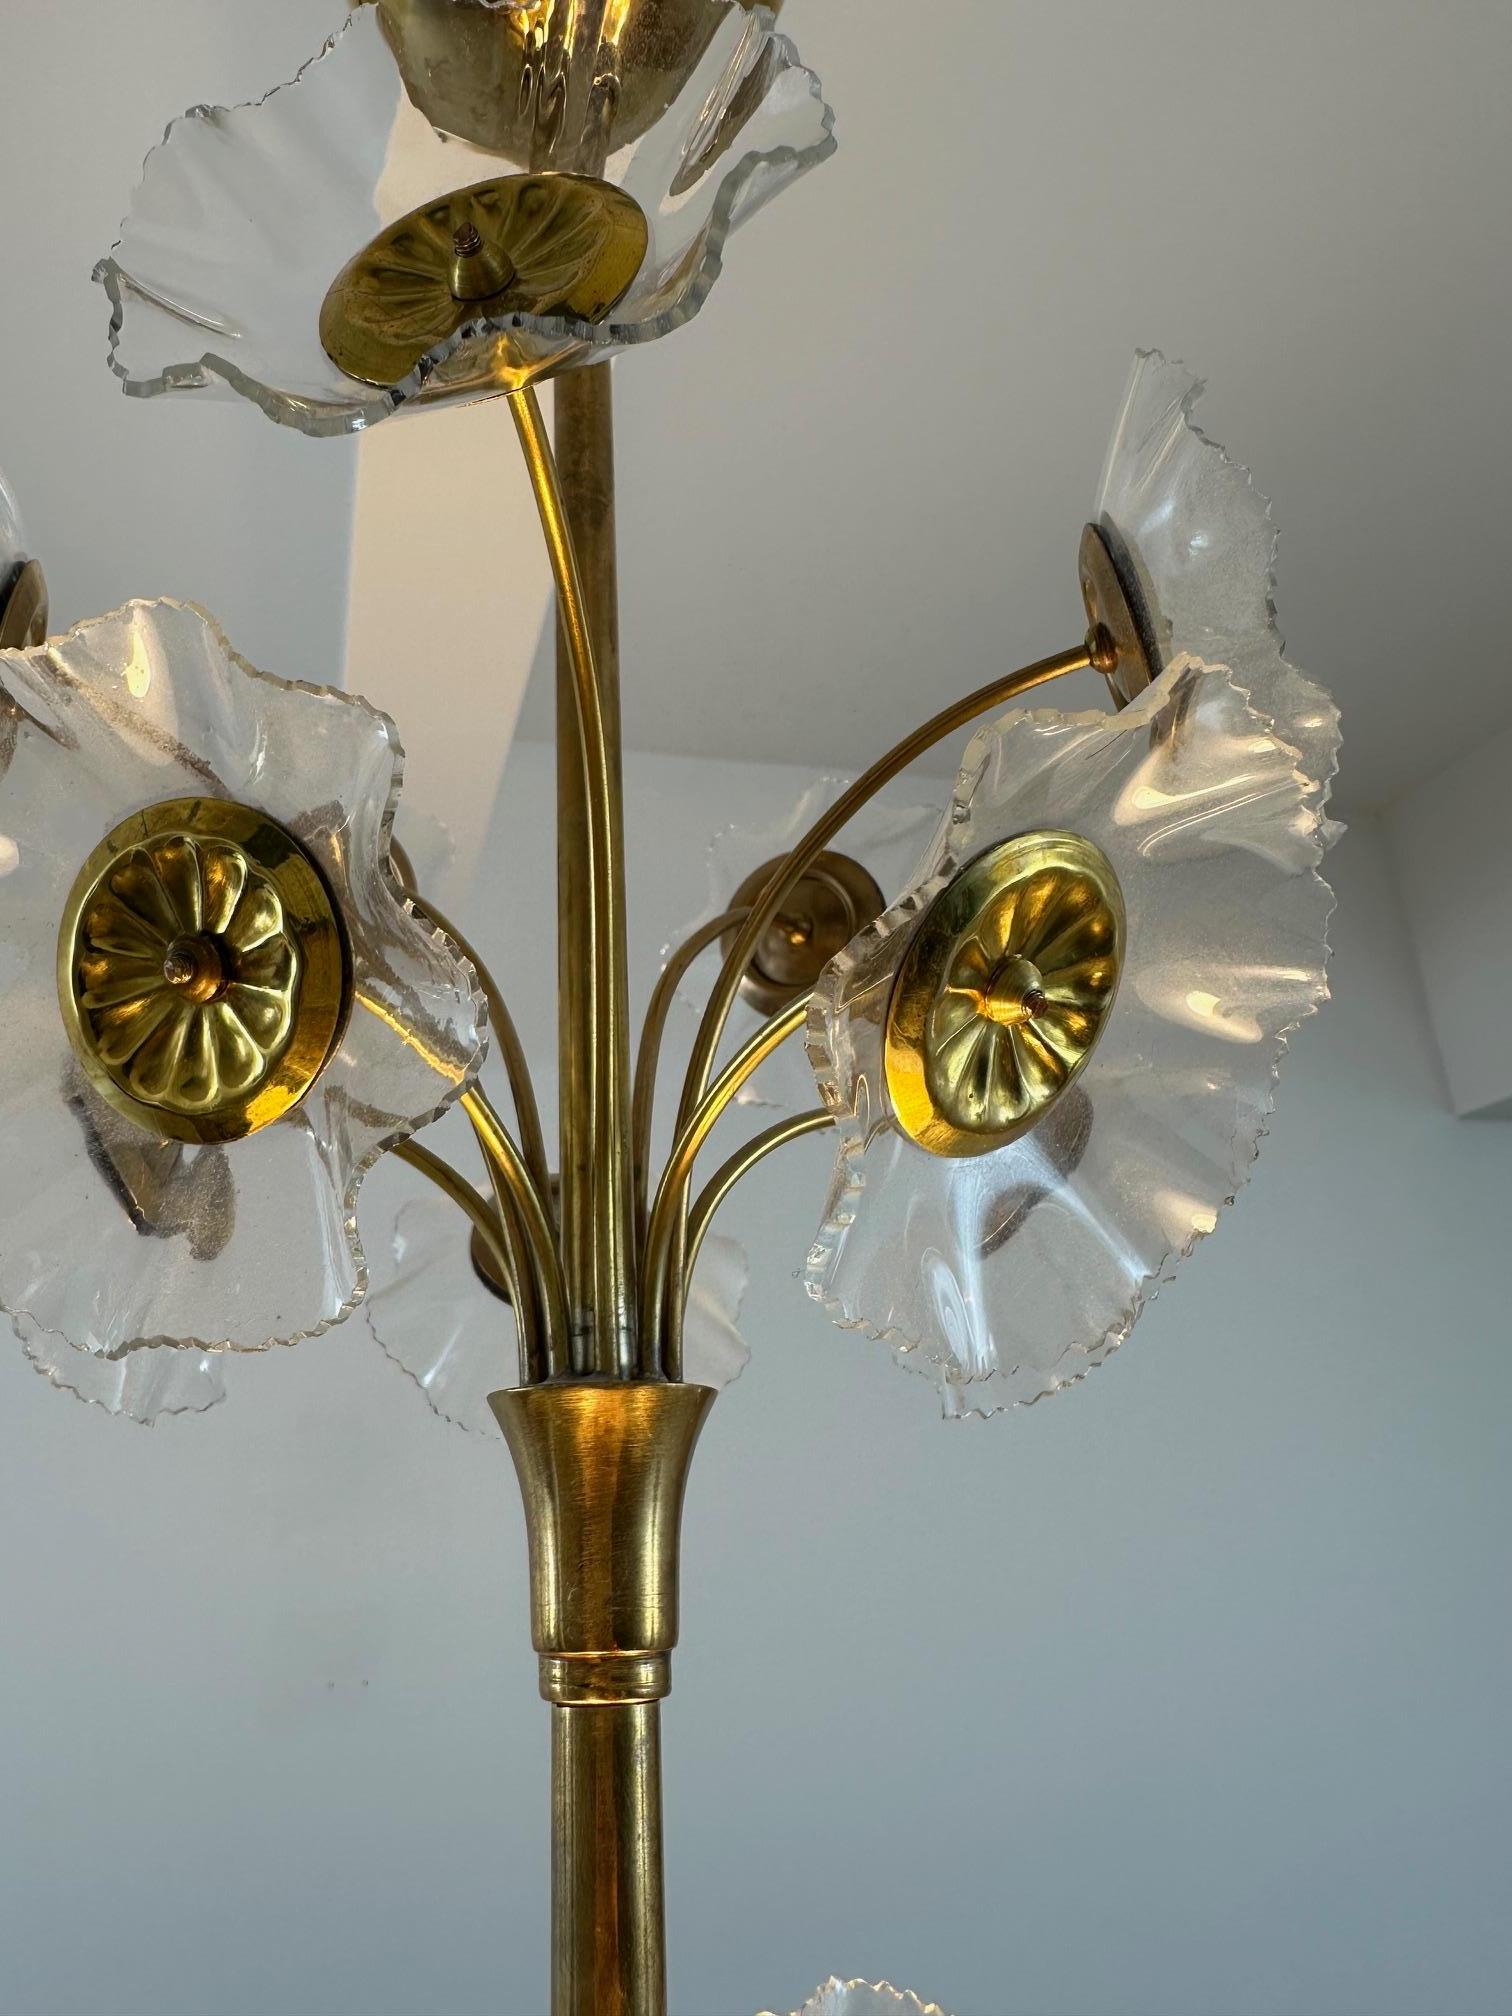 The most beautiful version of Lisa Johansson-Pape's floral chandelier.  The detailed floral decorations in this particular unit are on their own league compare to other similar Johansson-Pape chandeliers.  

This is very rare chandelier designed in